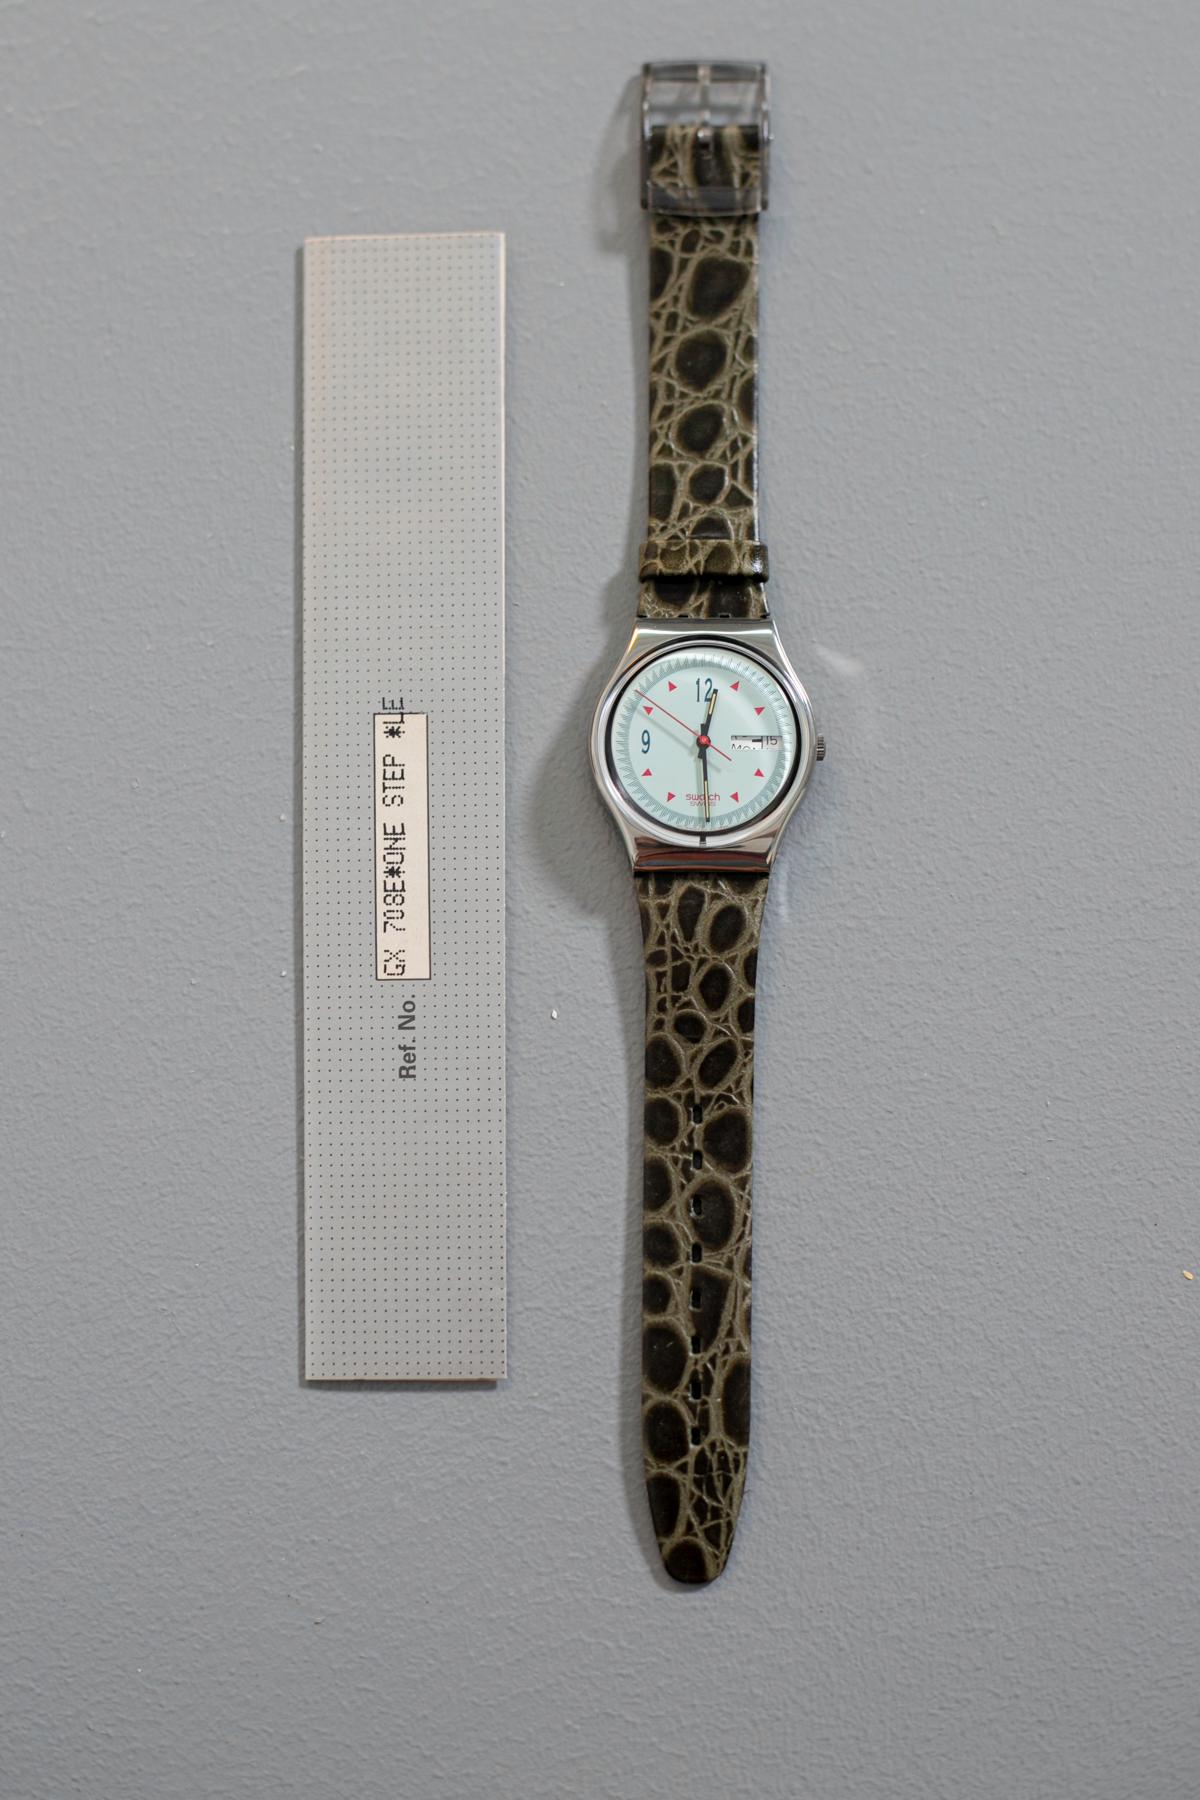 Swatch Vintage from the 1991 collection with a timeless design strap: imitation crocodile skin in a prestigious English green. This watch is highly recommended for those who love classic details without exaggeration.

Case Material: Plastic
Strap